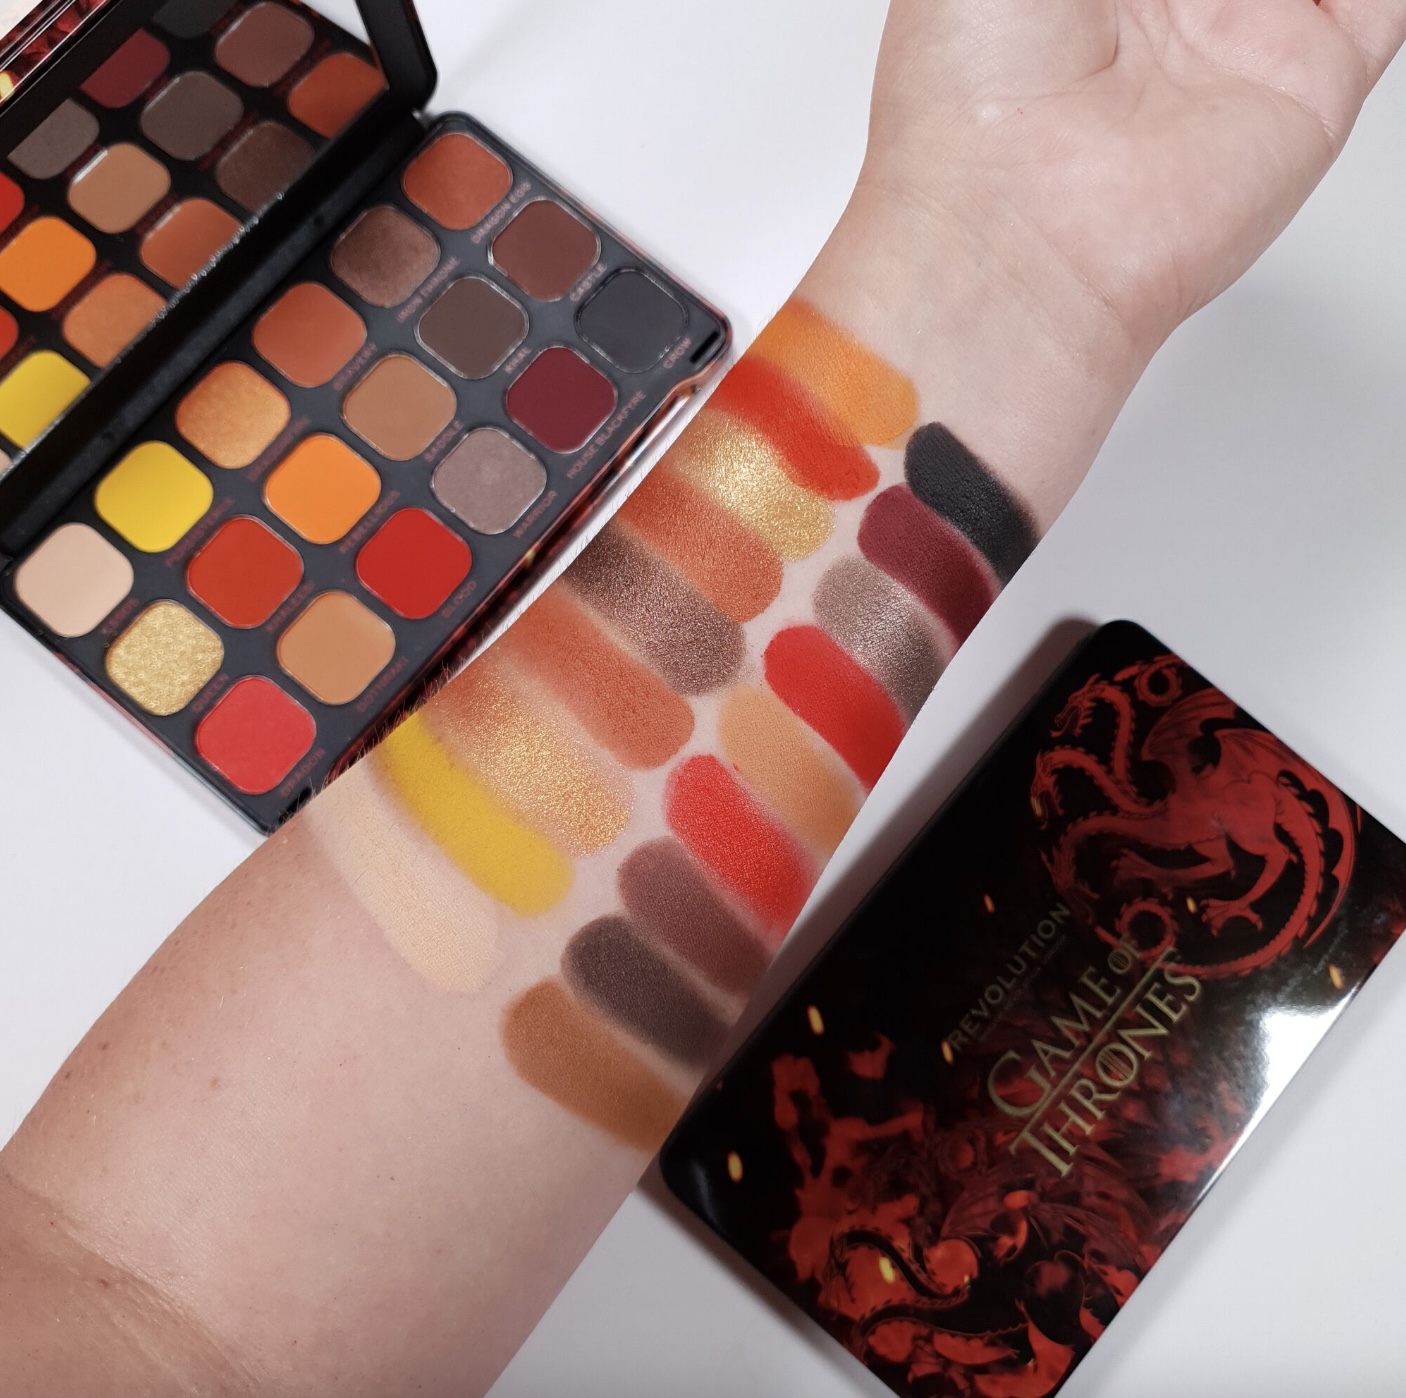 Revolution X Game of Thrones Mother of Dragons Forever Flawless Shadow Palette